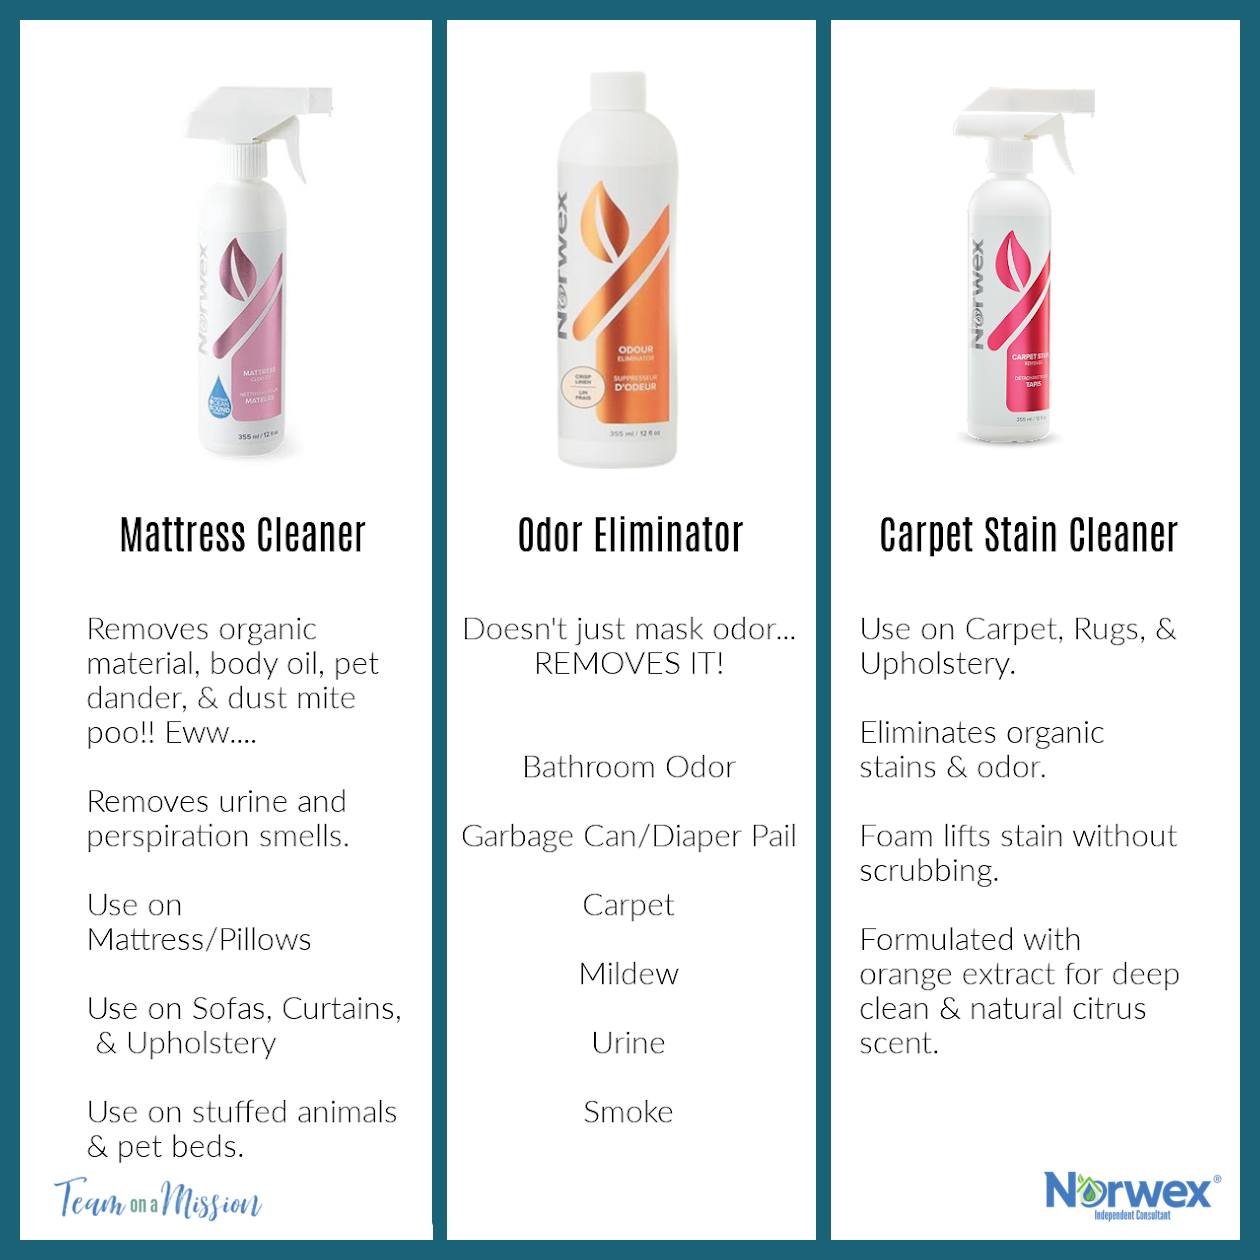 Norwex - Rest easy knowing your mattress is clean and fresh when you  incorporate our Mattress Cleaner into your routine. Enzymes remove organic  waste like dead skin cells, body oils and pet